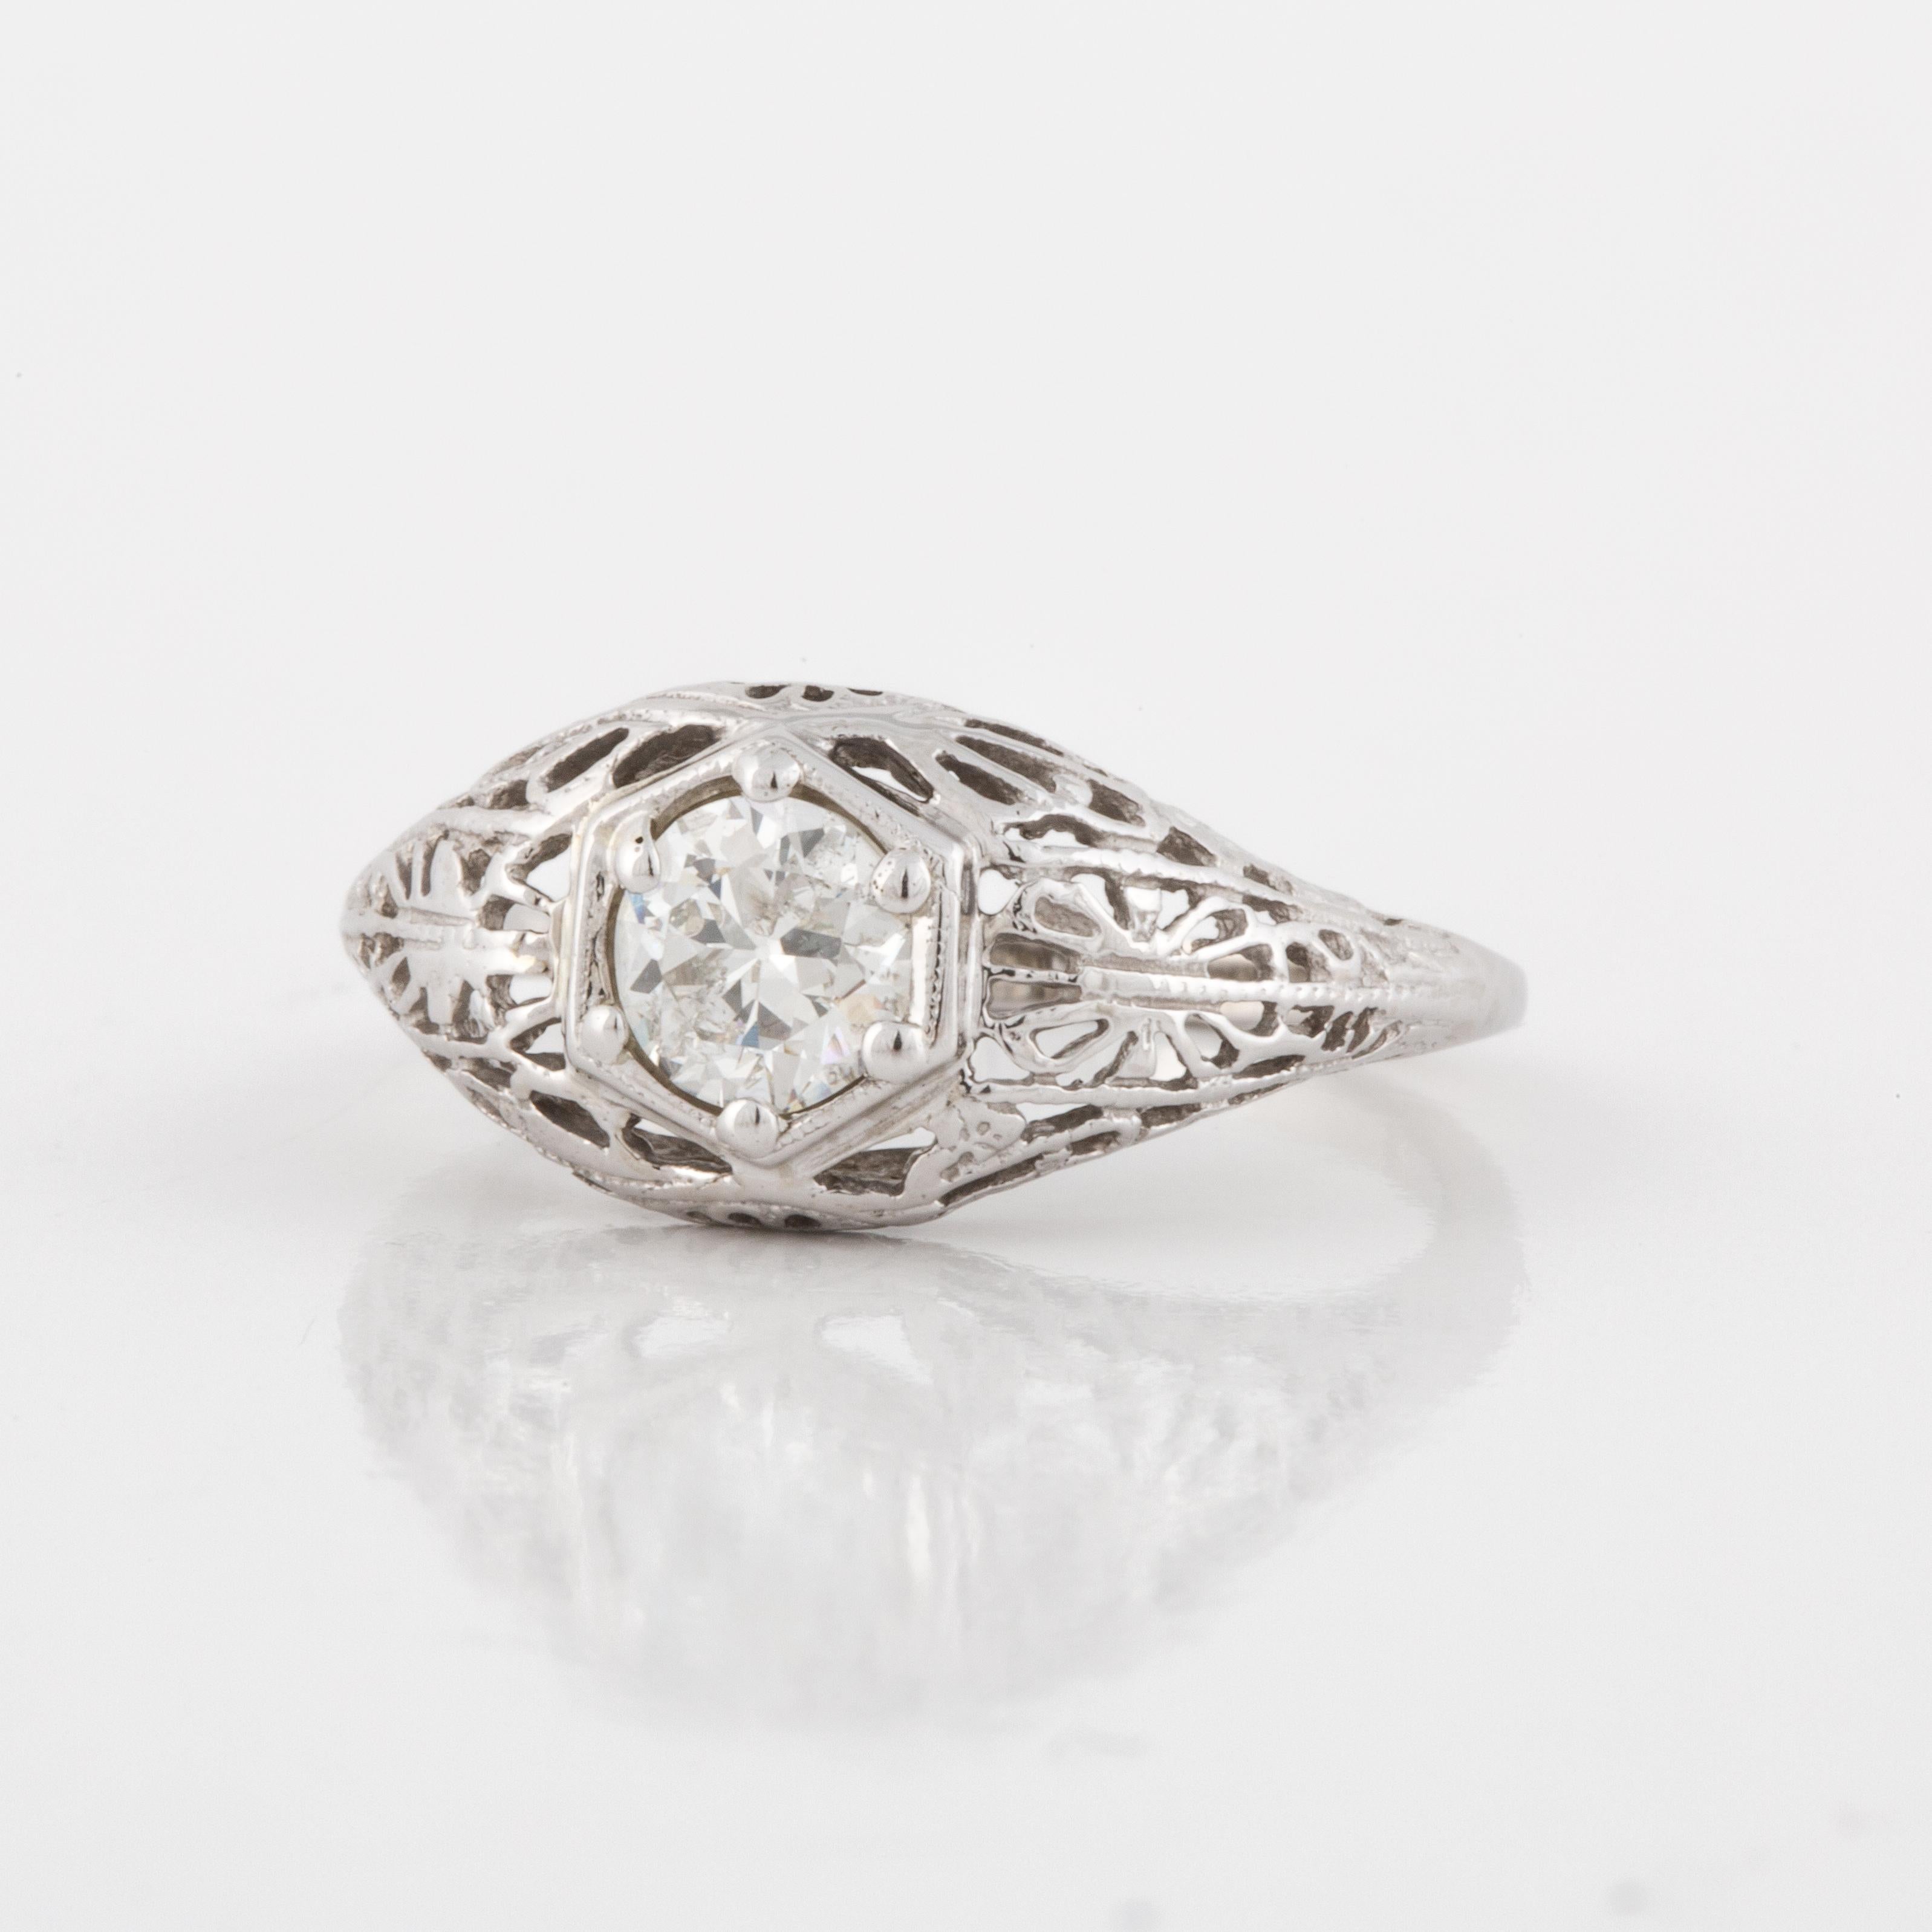 14K white gold filigree ring from the 1920's.  Filigree work is still in good condition with no loss or cracks.  Diamond is an Old European Cut weighing 0.55 carats; it is G-H in color and SI2-I1 in clarity.  Measures 5/8